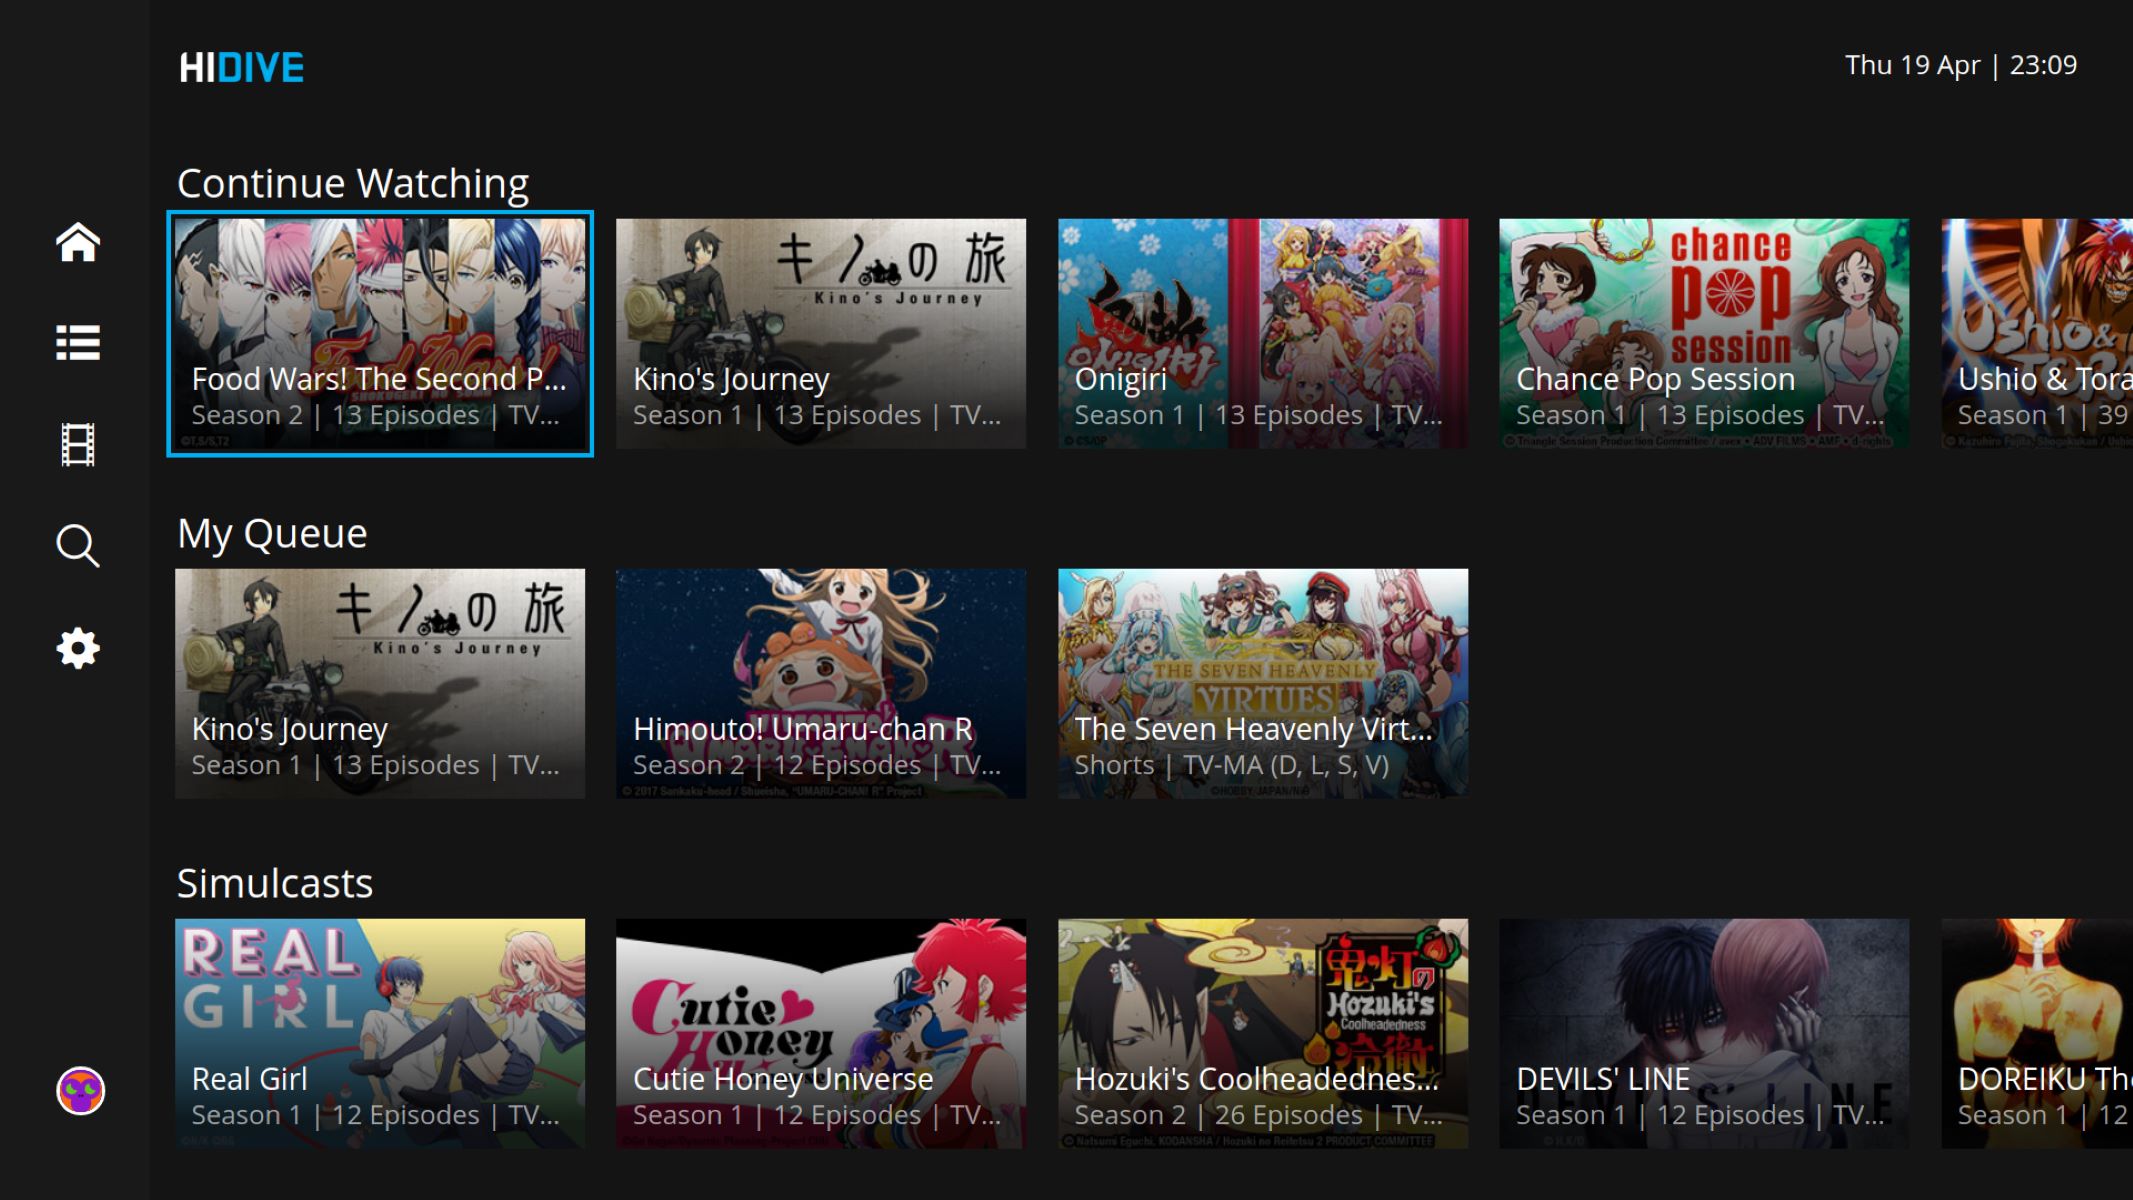 Hidive: The Ultimate Safe And Legit Anime Streaming Site